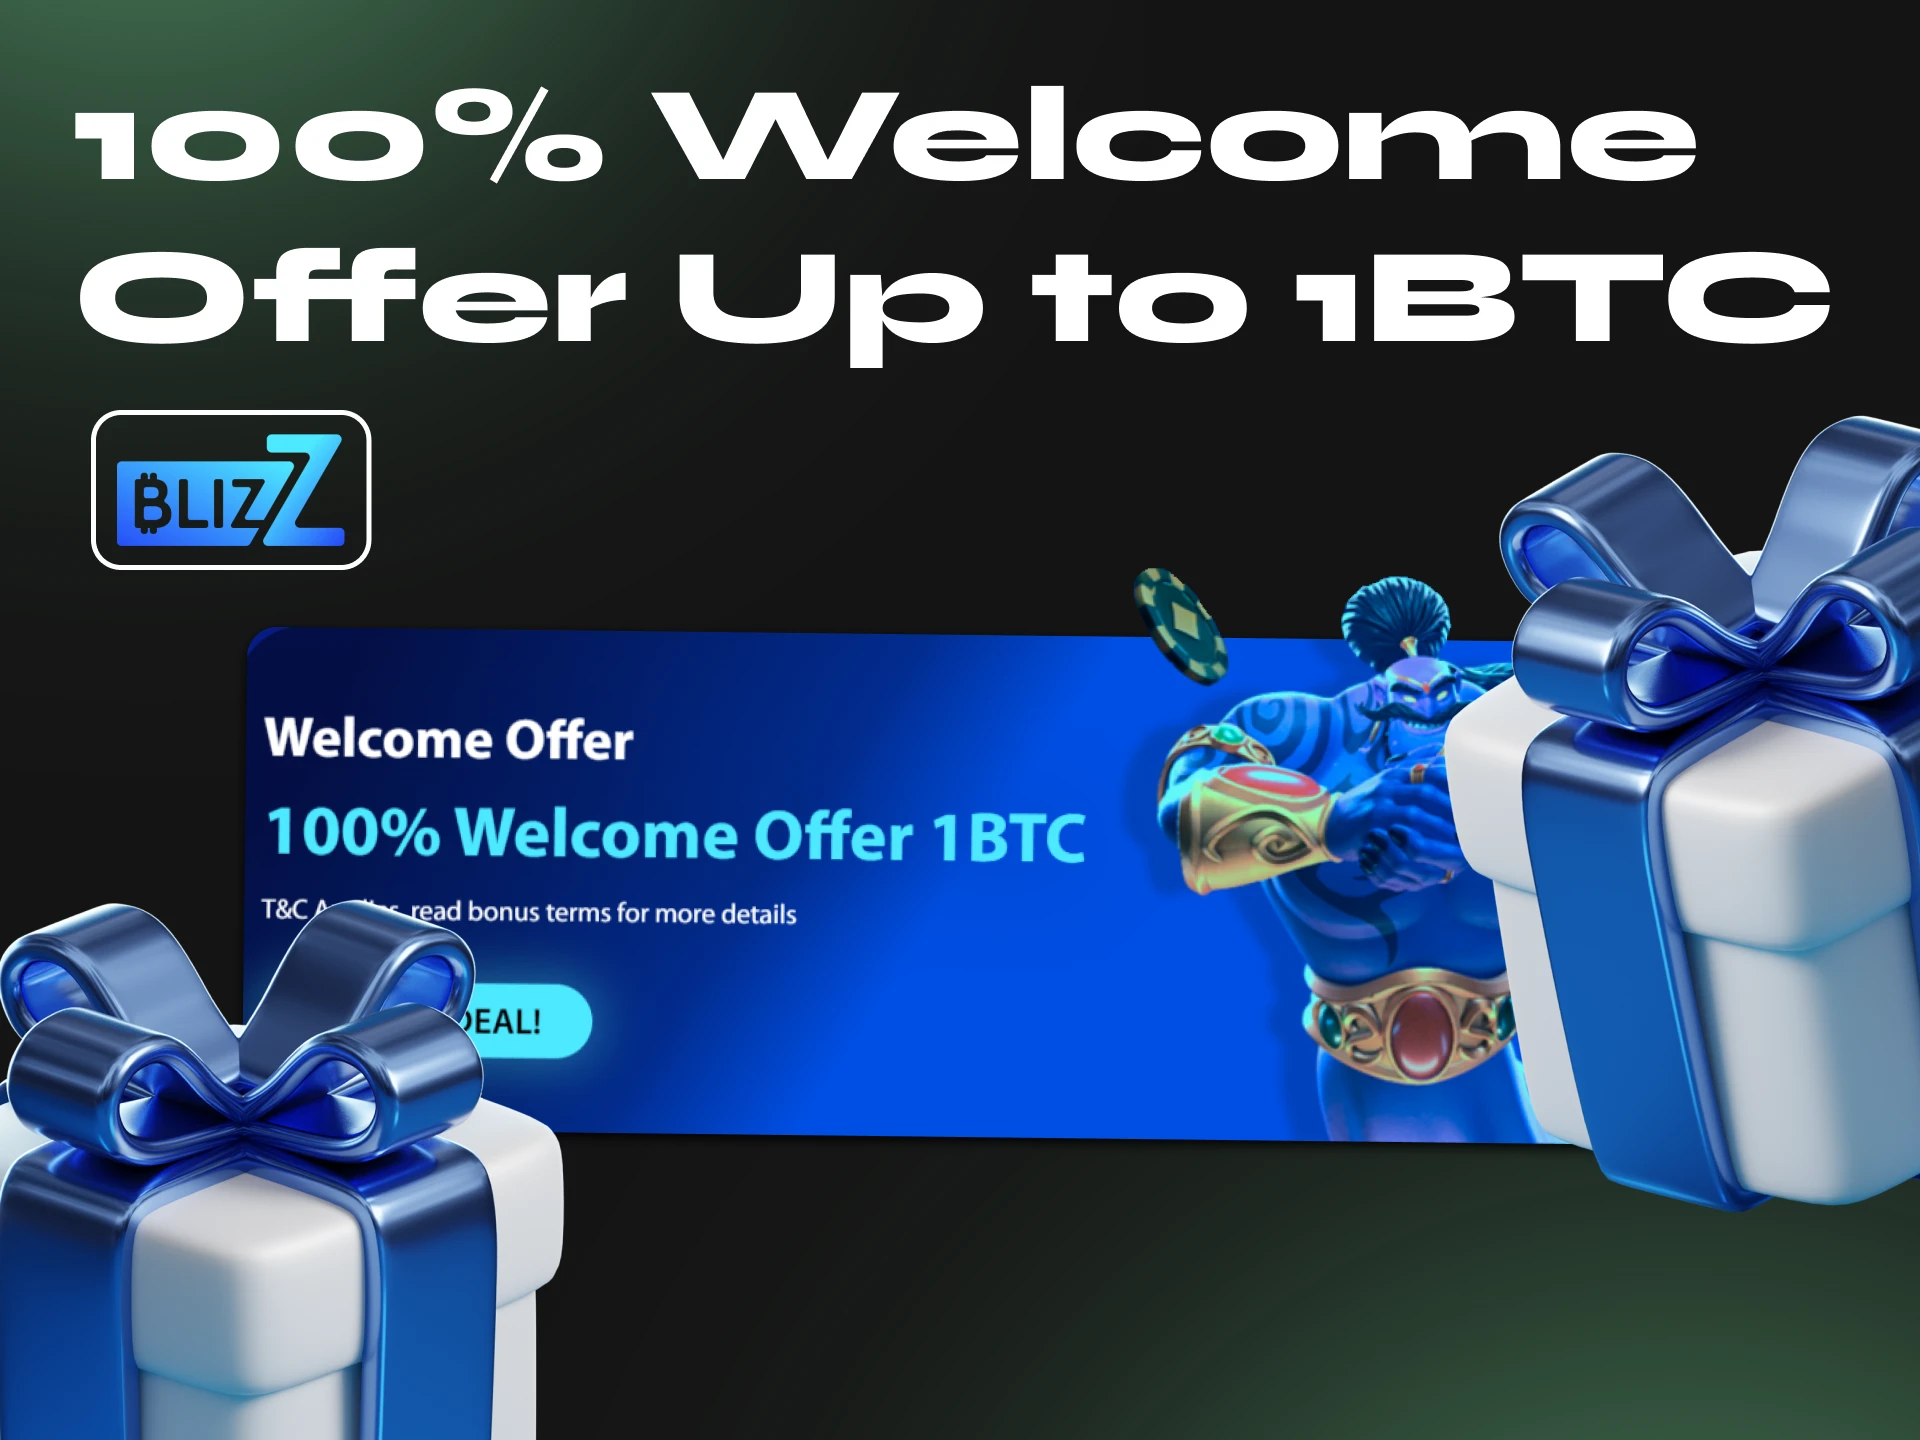 At Blizz io you can get a welcome bonus and start playing poker for cryptocurrency.